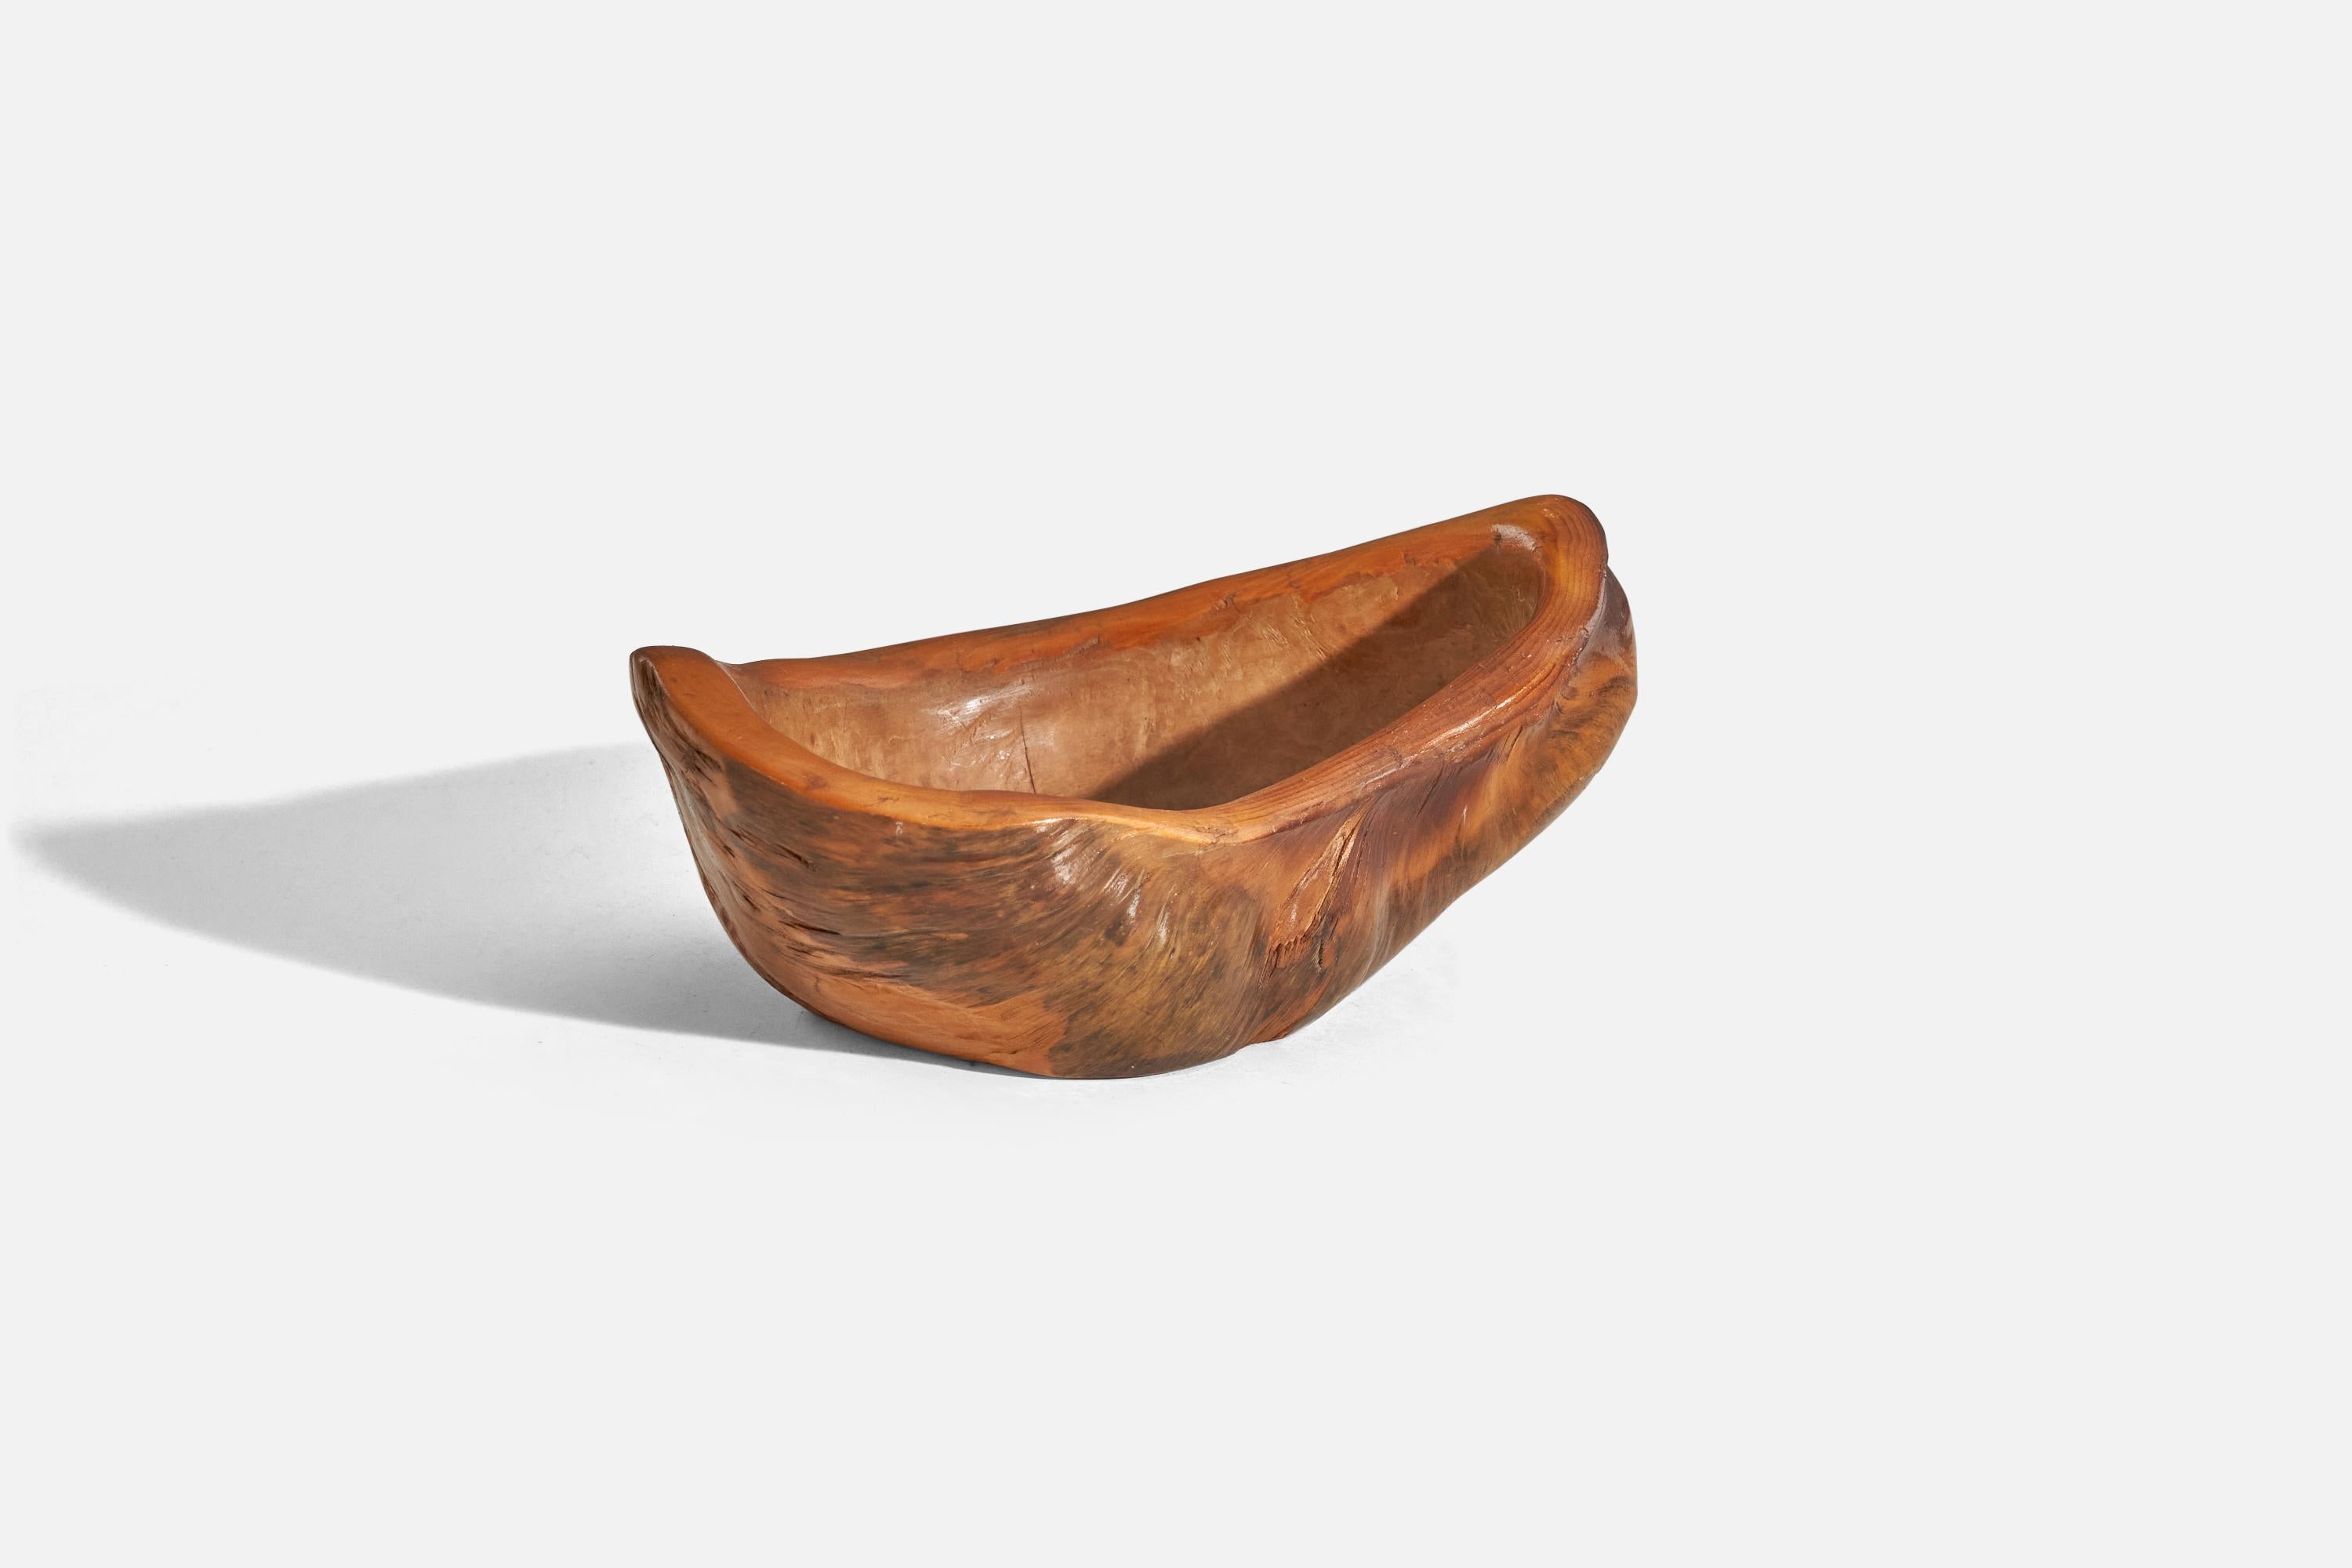 A burl-wood bowl designed and produced in Sweden, c. 1960s.